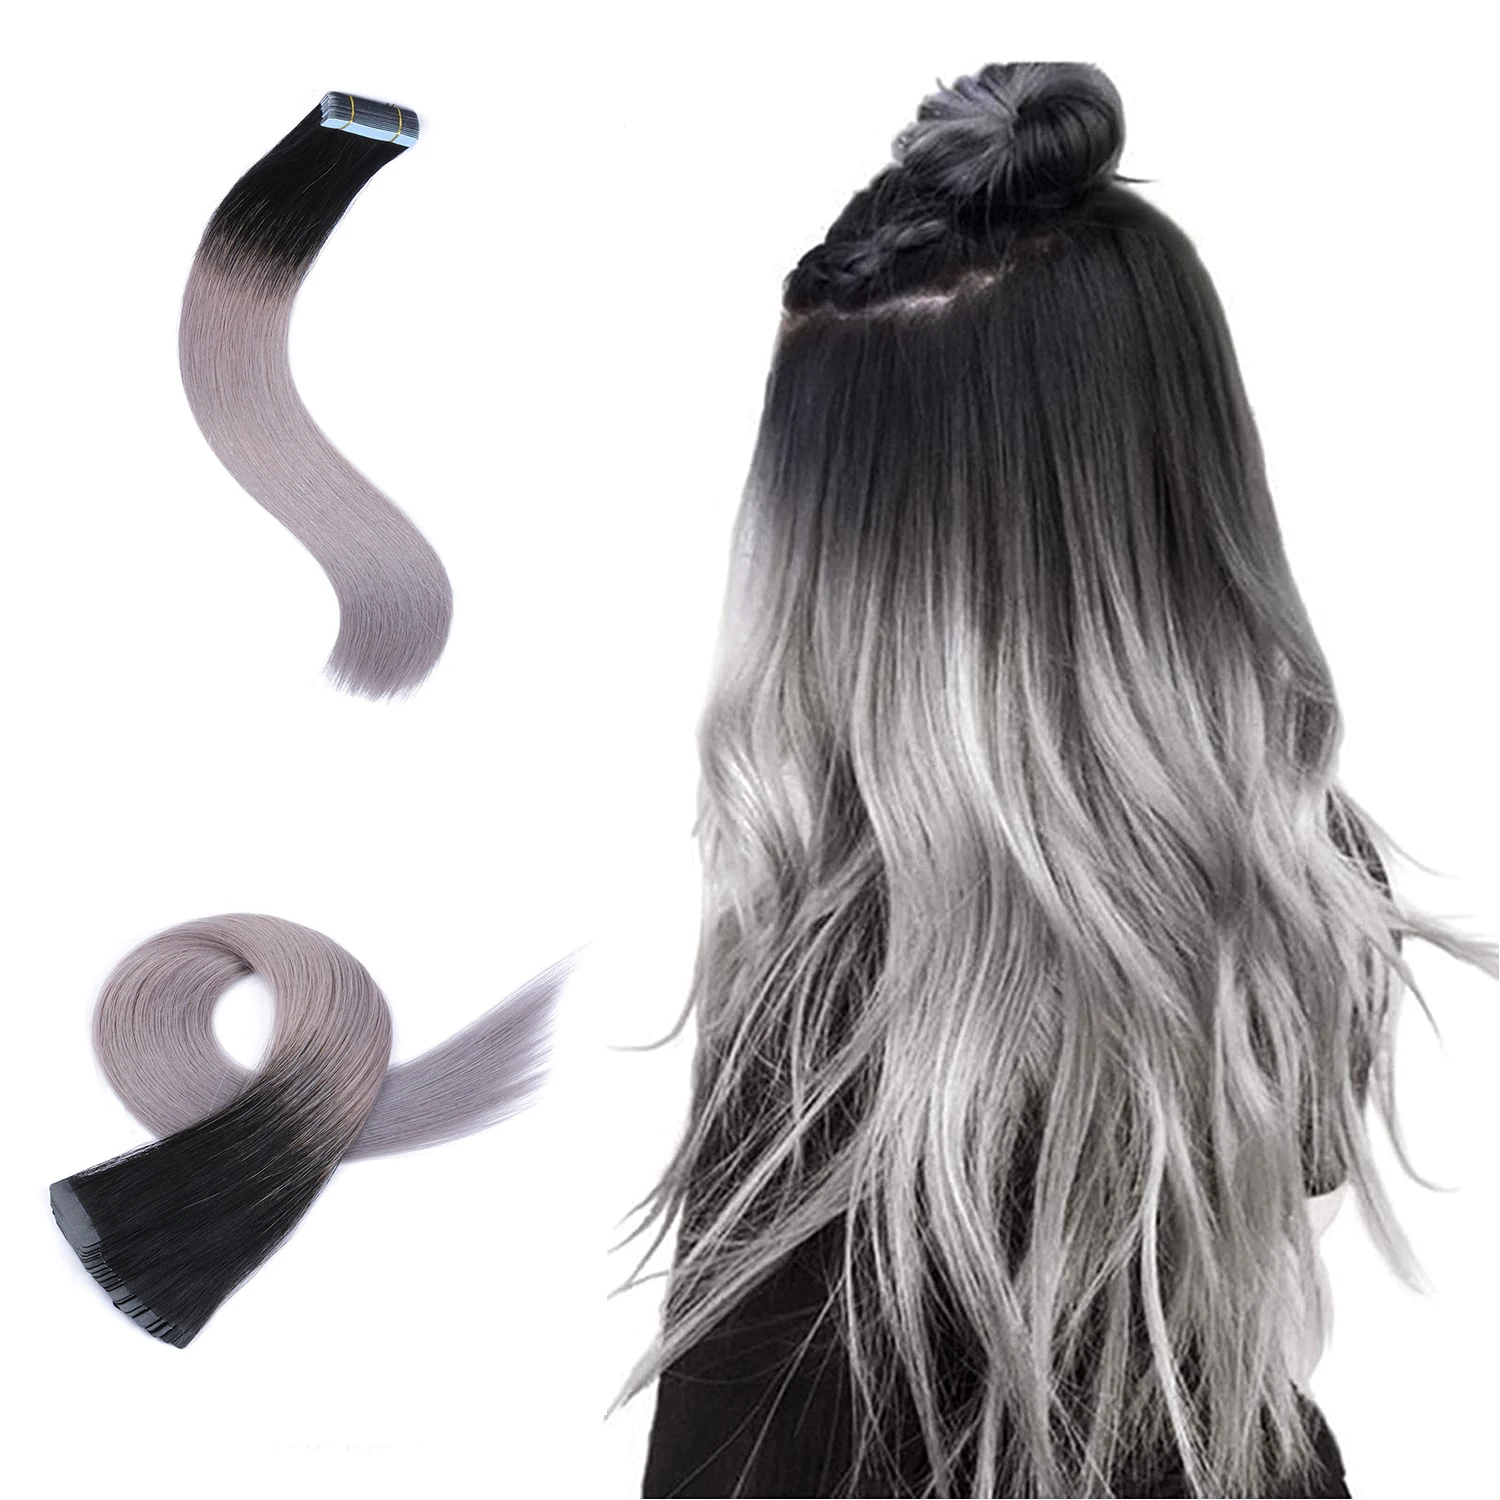 Ombre Ash Blonde Natural Tape In HumanHair Extensions Skin Weft Hair Extensions Adhesive Invisible Real Straight For Black Women